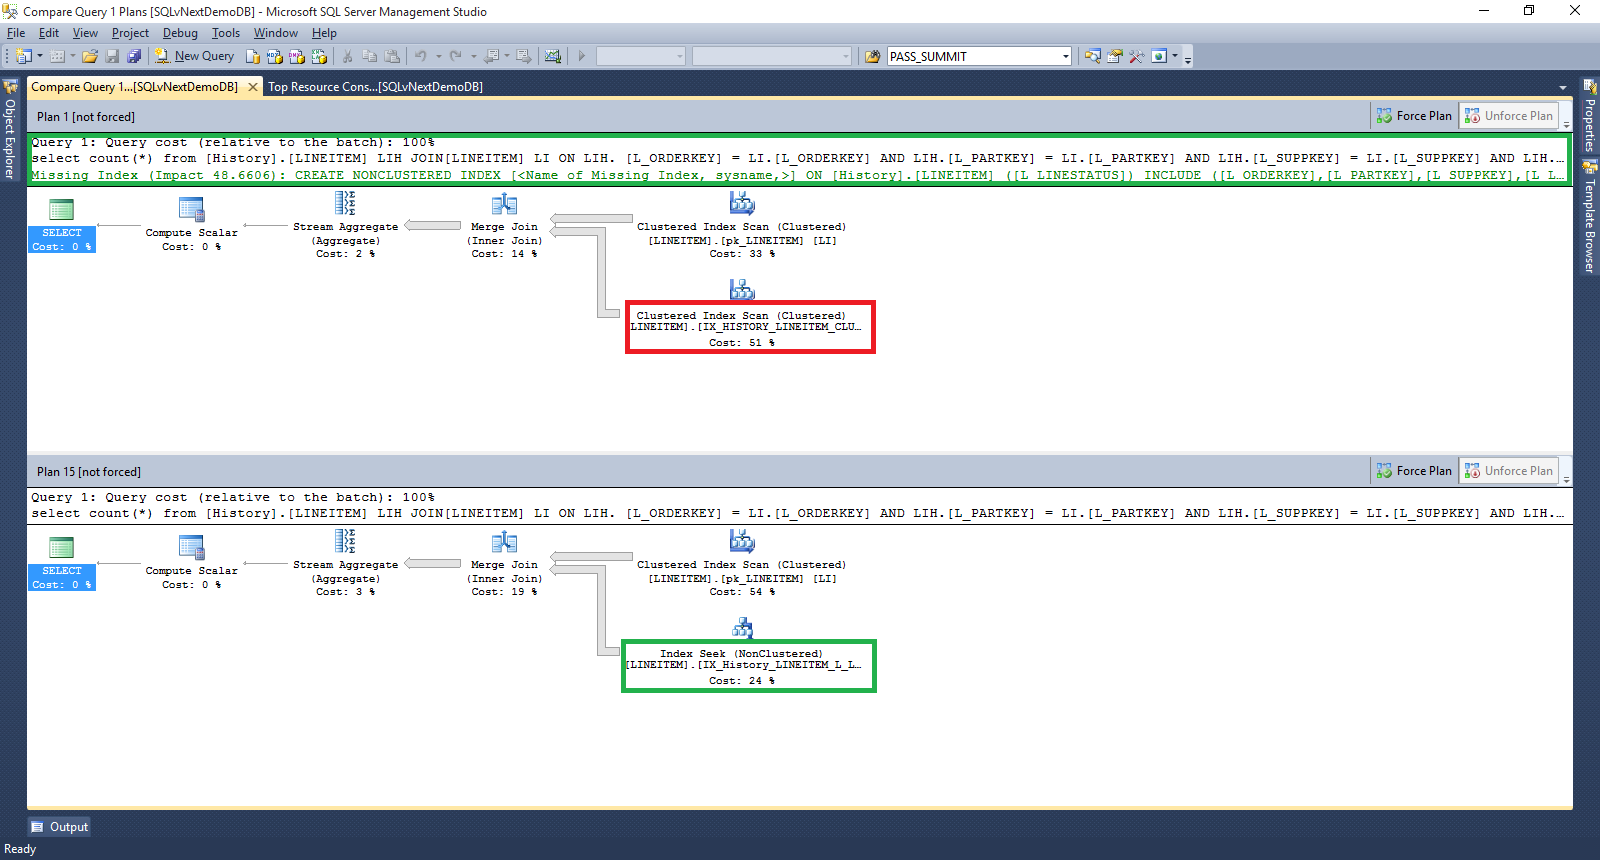 Screenshot showing the Query Store and the Compare the plans for the selected query in a separate window toolbar option.